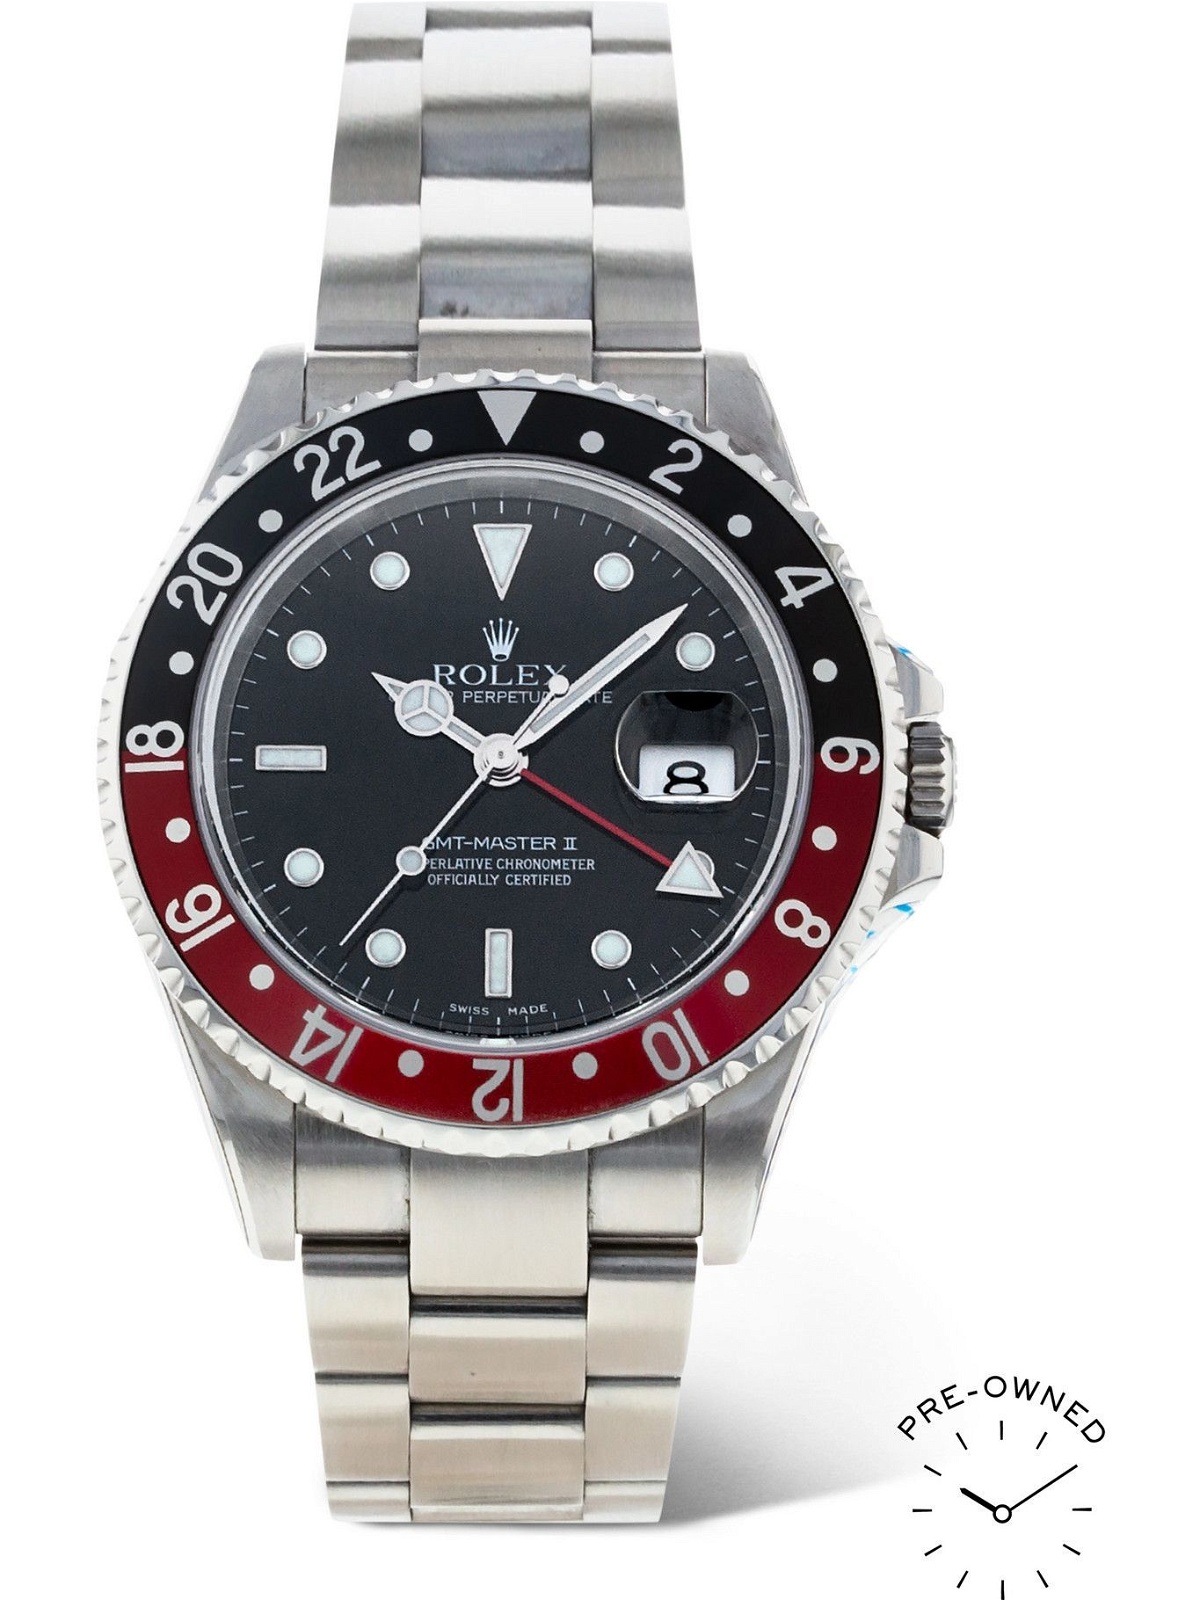 ROLEX - Pre-Owned 2005 GMT Master II 40mm Automatic Oystersteel Watch, Ref. No. 16710